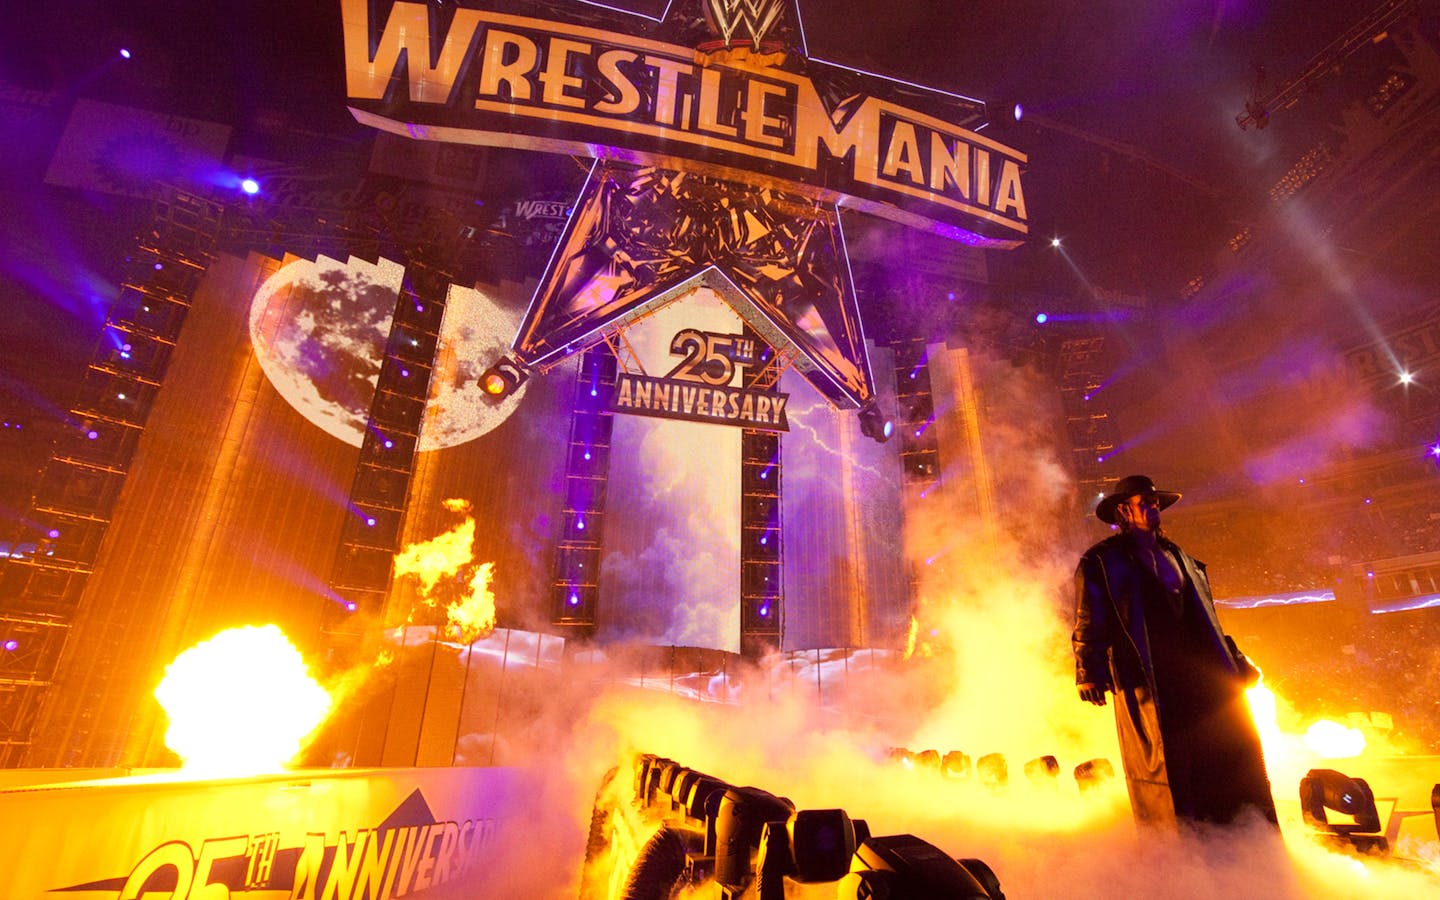 As WrestleMania 38 Kicks Off, the Undertaker Reflects on His Texas Roots